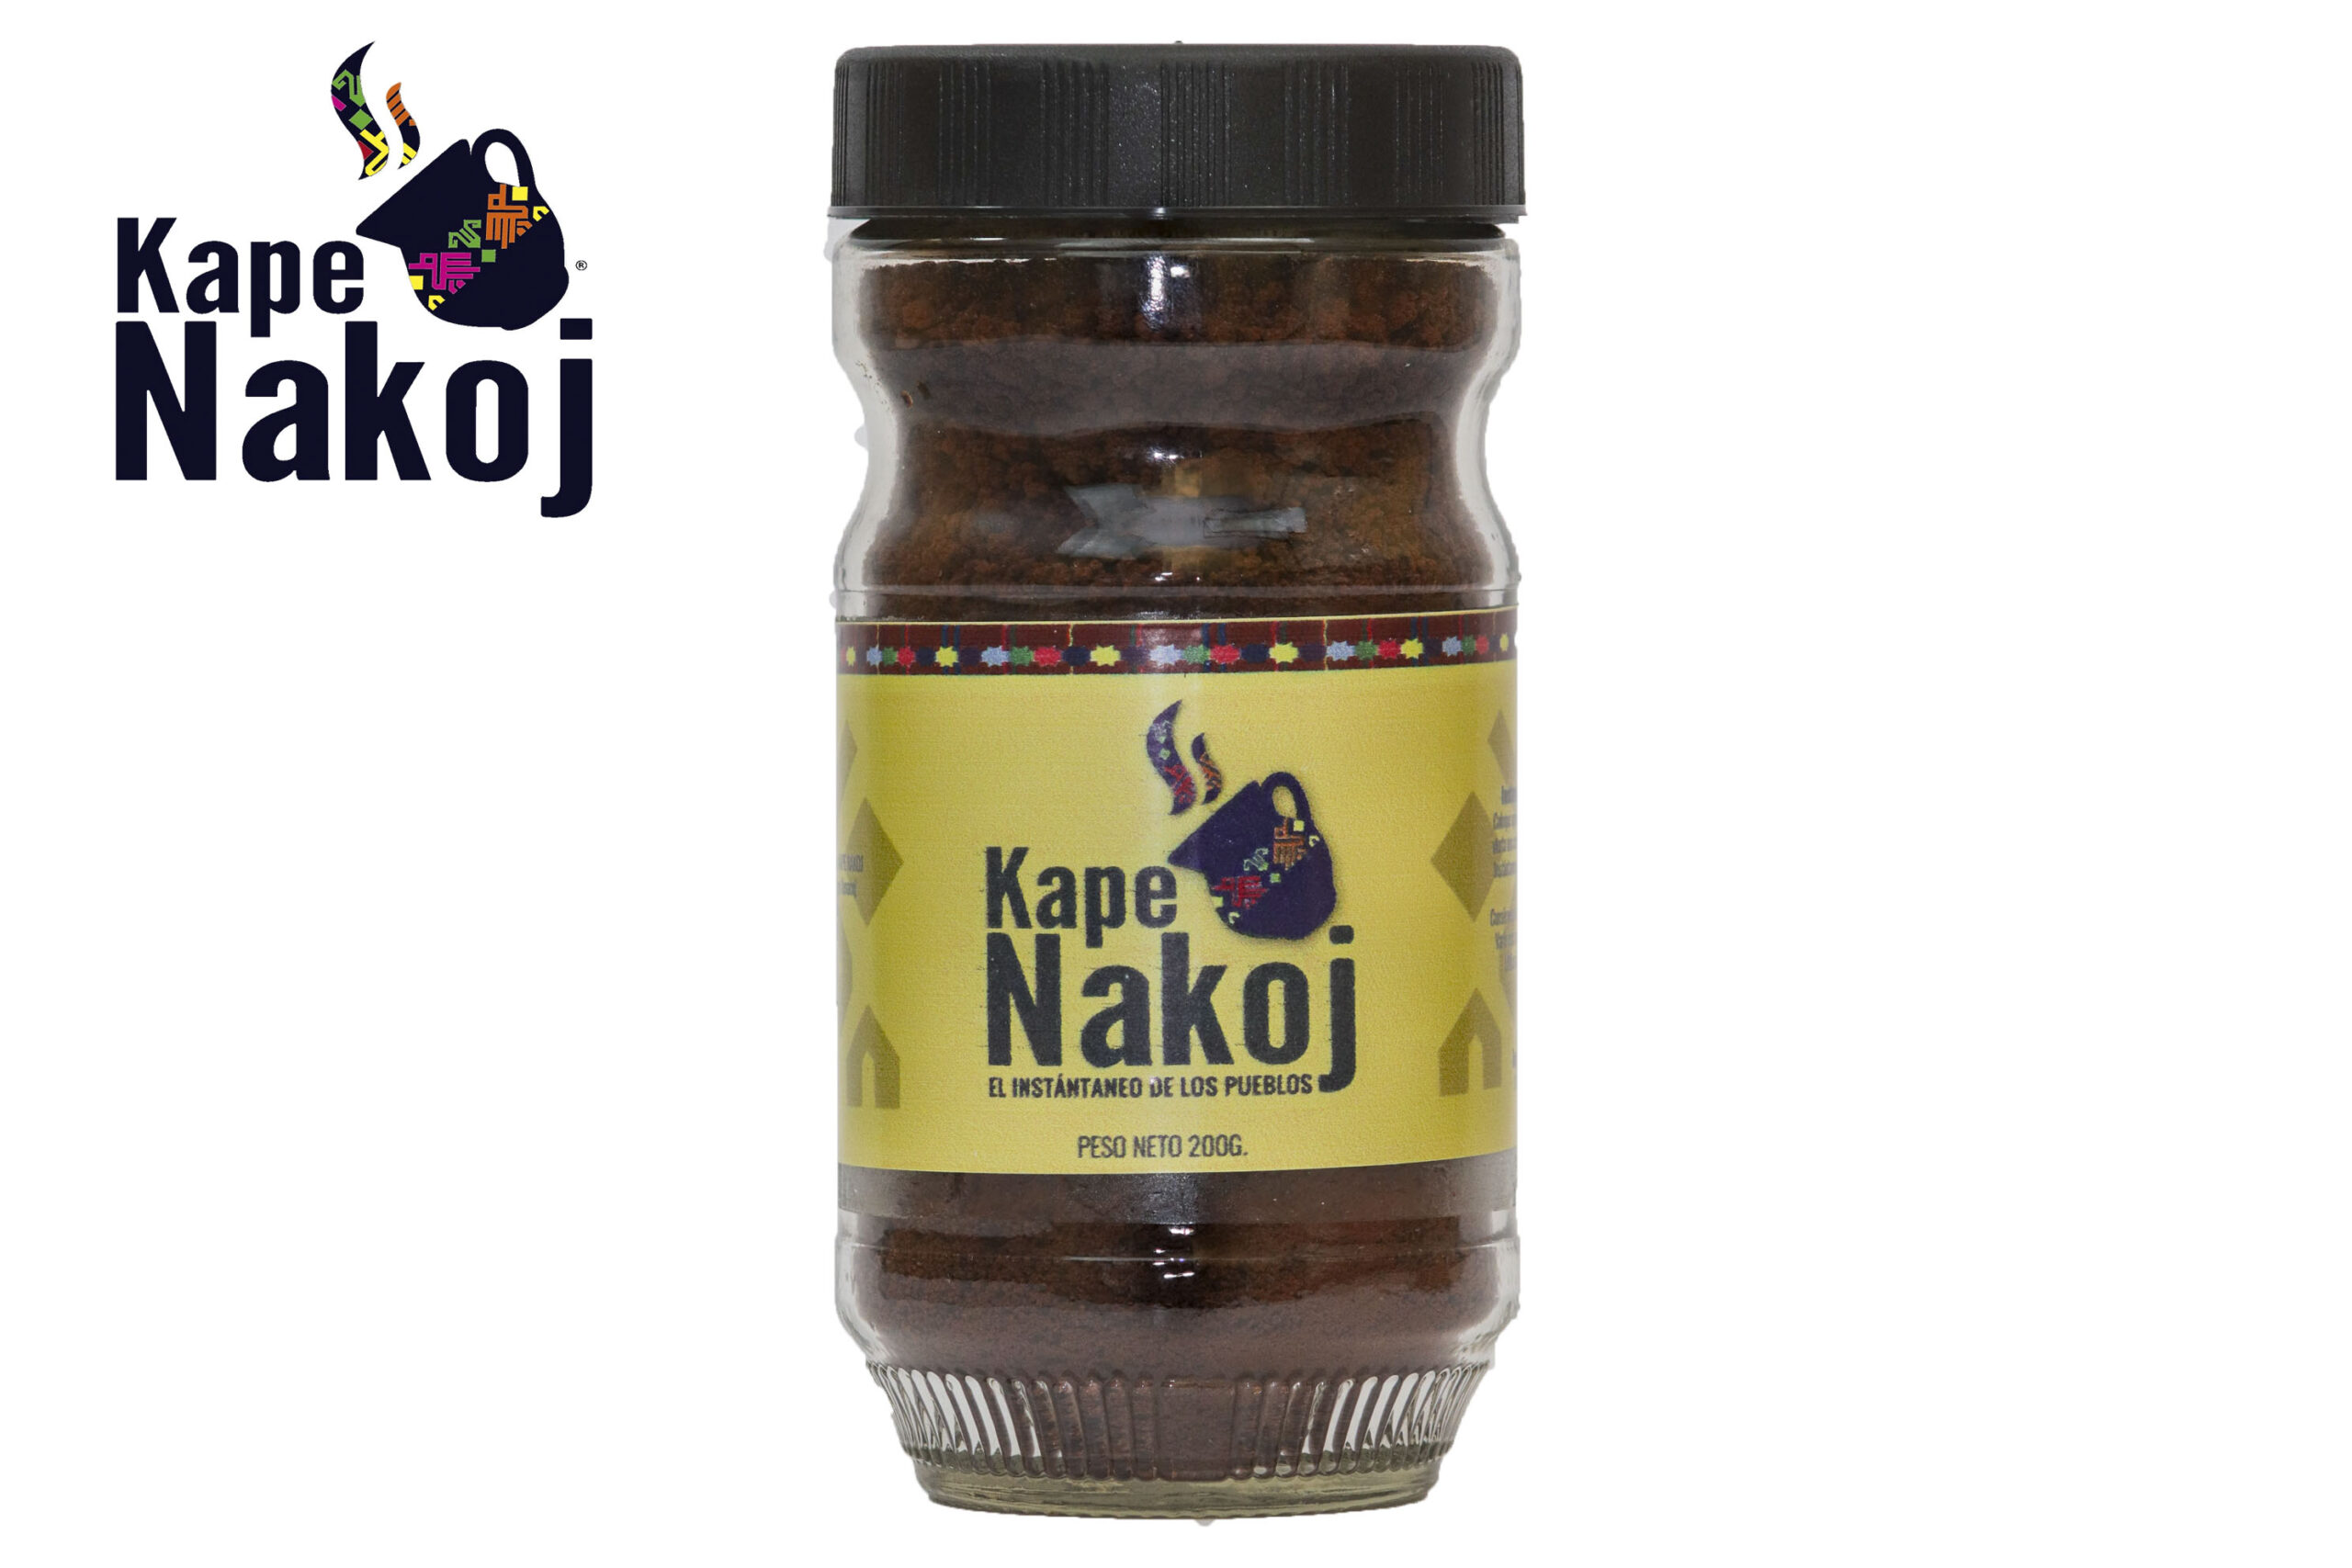 Kape Nakoj arabica instant coffee powder (e 200g), made from coffee beans from regions of Guatemala at over 1370 meters above sea level.